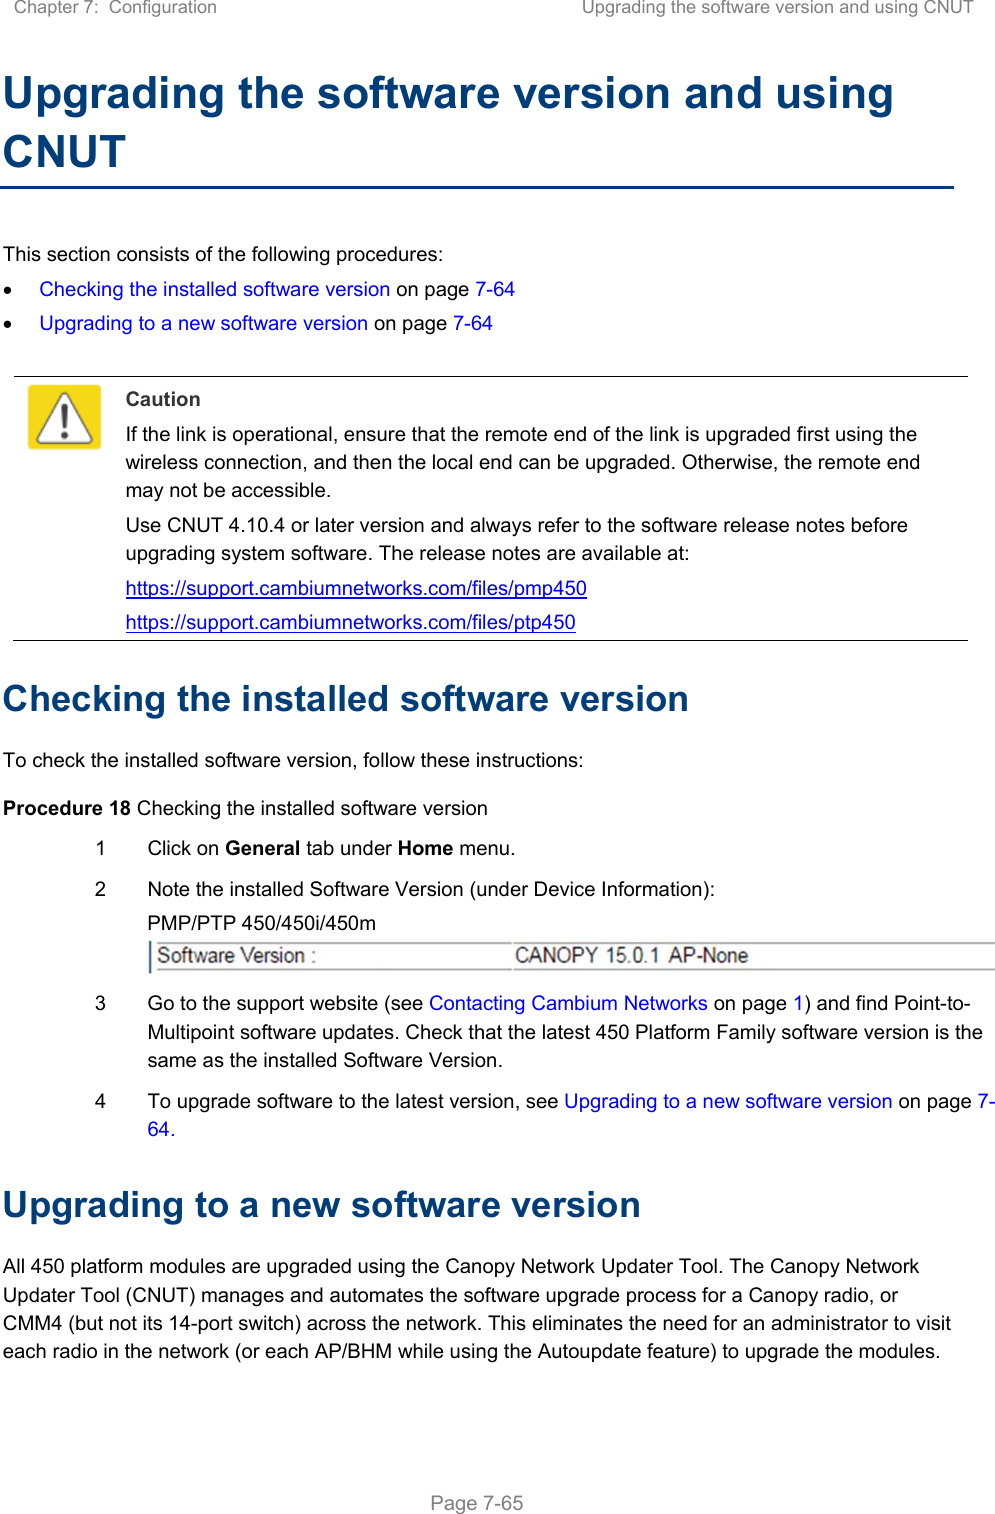 Chapter 7:  Configuration  Upgrading the software version and using CNUT   Page 7-65 Upgrading the software version and using CNUT This section consists of the following procedures:  Checking the installed software version on page 7-64  Upgrading to a new software version on page 7-64   Caution If the link is operational, ensure that the remote end of the link is upgraded first using the wireless connection, and then the local end can be upgraded. Otherwise, the remote end may not be accessible. Use CNUT 4.10.4 or later version and always refer to the software release notes before upgrading system software. The release notes are available at: https://support.cambiumnetworks.com/files/pmp450 https://support.cambiumnetworks.com/files/ptp450 Checking the installed software version To check the installed software version, follow these instructions: Procedure 18 Checking the installed software version 1  Click on General tab under Home menu. 2  Note the installed Software Version (under Device Information): PMP/PTP 450/450i/450m  3  Go to the support website (see Contacting Cambium Networks on page 1) and find Point-to-Multipoint software updates. Check that the latest 450 Platform Family software version is the same as the installed Software Version. 4  To upgrade software to the latest version, see Upgrading to a new software version on page 7-64. Upgrading to a new software version All 450 platform modules are upgraded using the Canopy Network Updater Tool. The Canopy Network Updater Tool (CNUT) manages and automates the software upgrade process for a Canopy radio, or CMM4 (but not its 14-port switch) across the network. This eliminates the need for an administrator to visit each radio in the network (or each AP/BHM while using the Autoupdate feature) to upgrade the modules.  